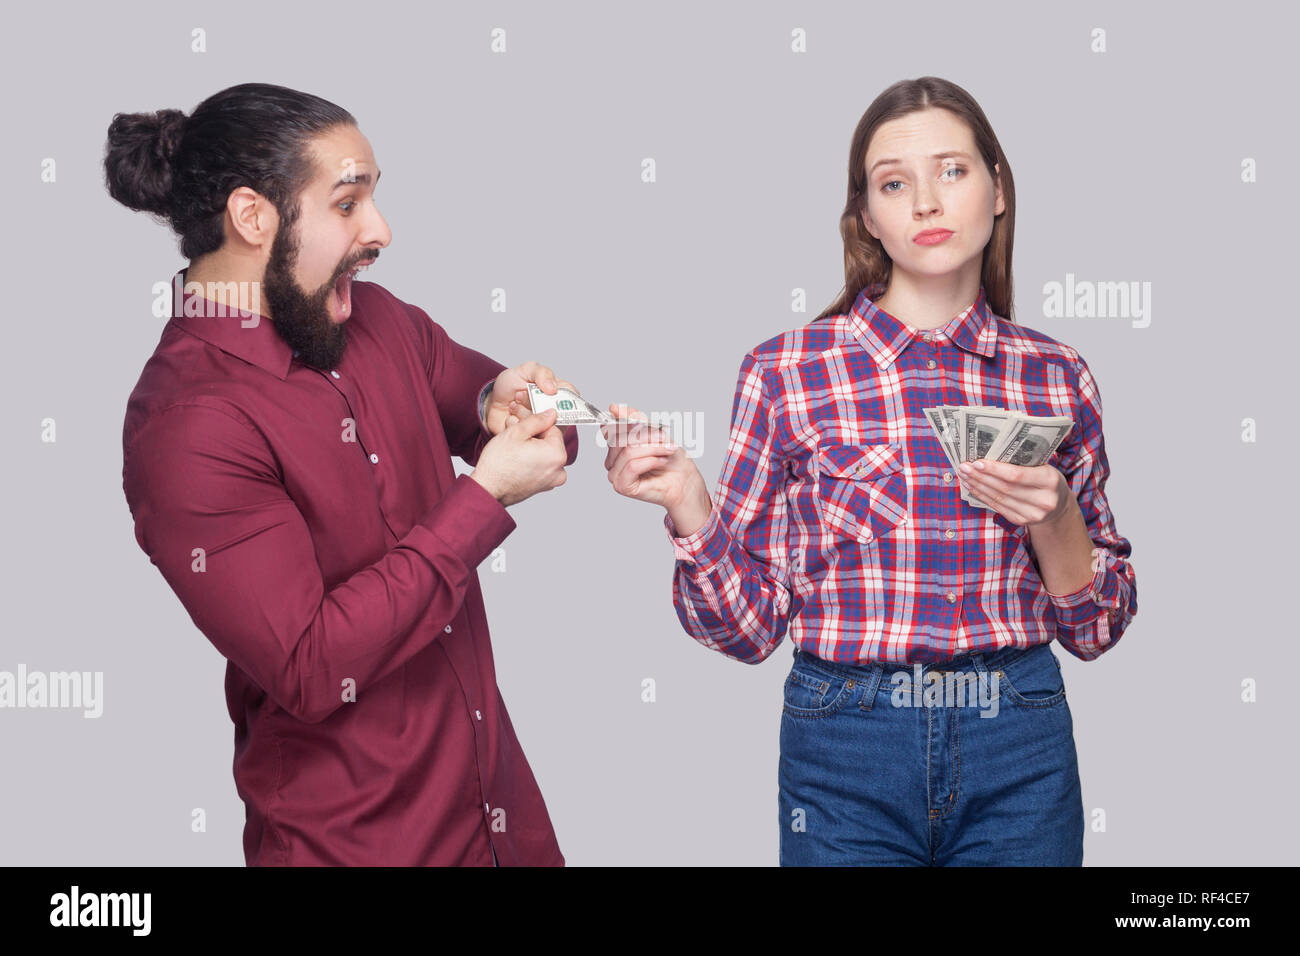 Portrait of rich serious woman with fan of money, sharing with amazed or surprised hungry man. standing and looking at camera like a boss. indoor stud Stock Photo